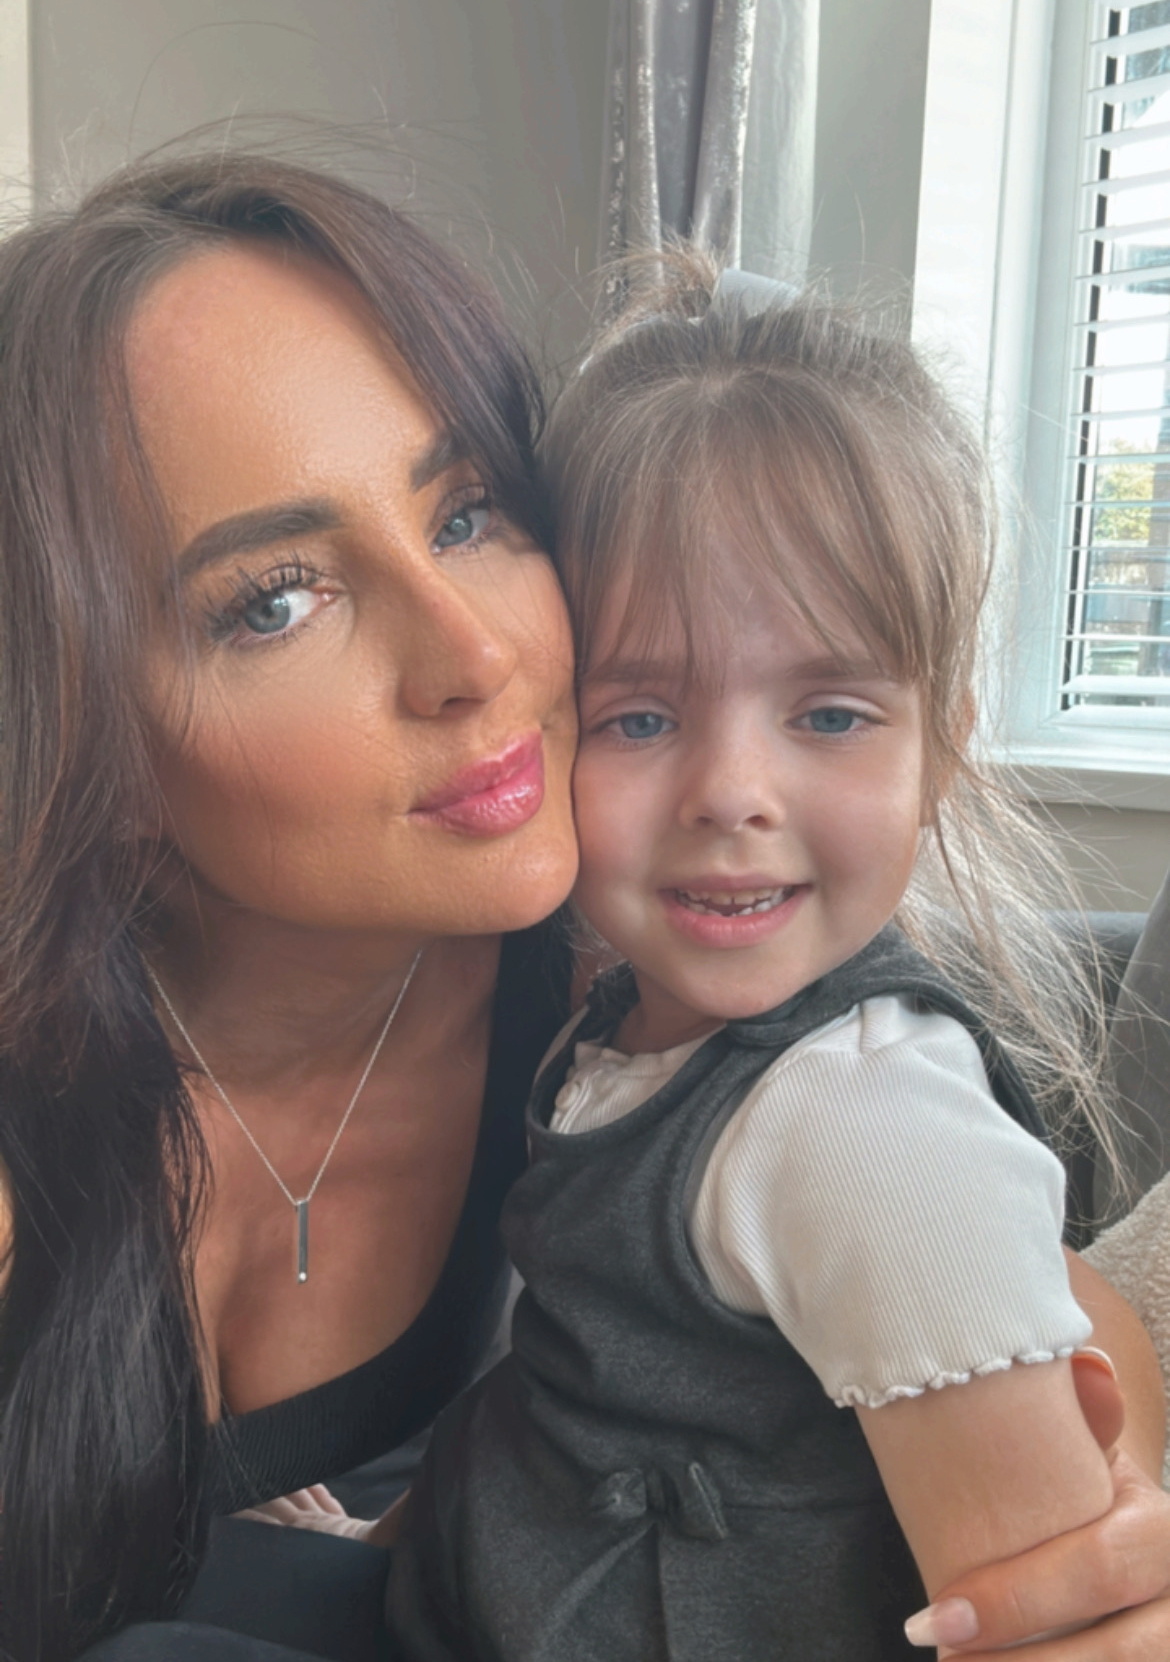 Harlow will need a kidney transplant, with mum Melanie, above, the donor